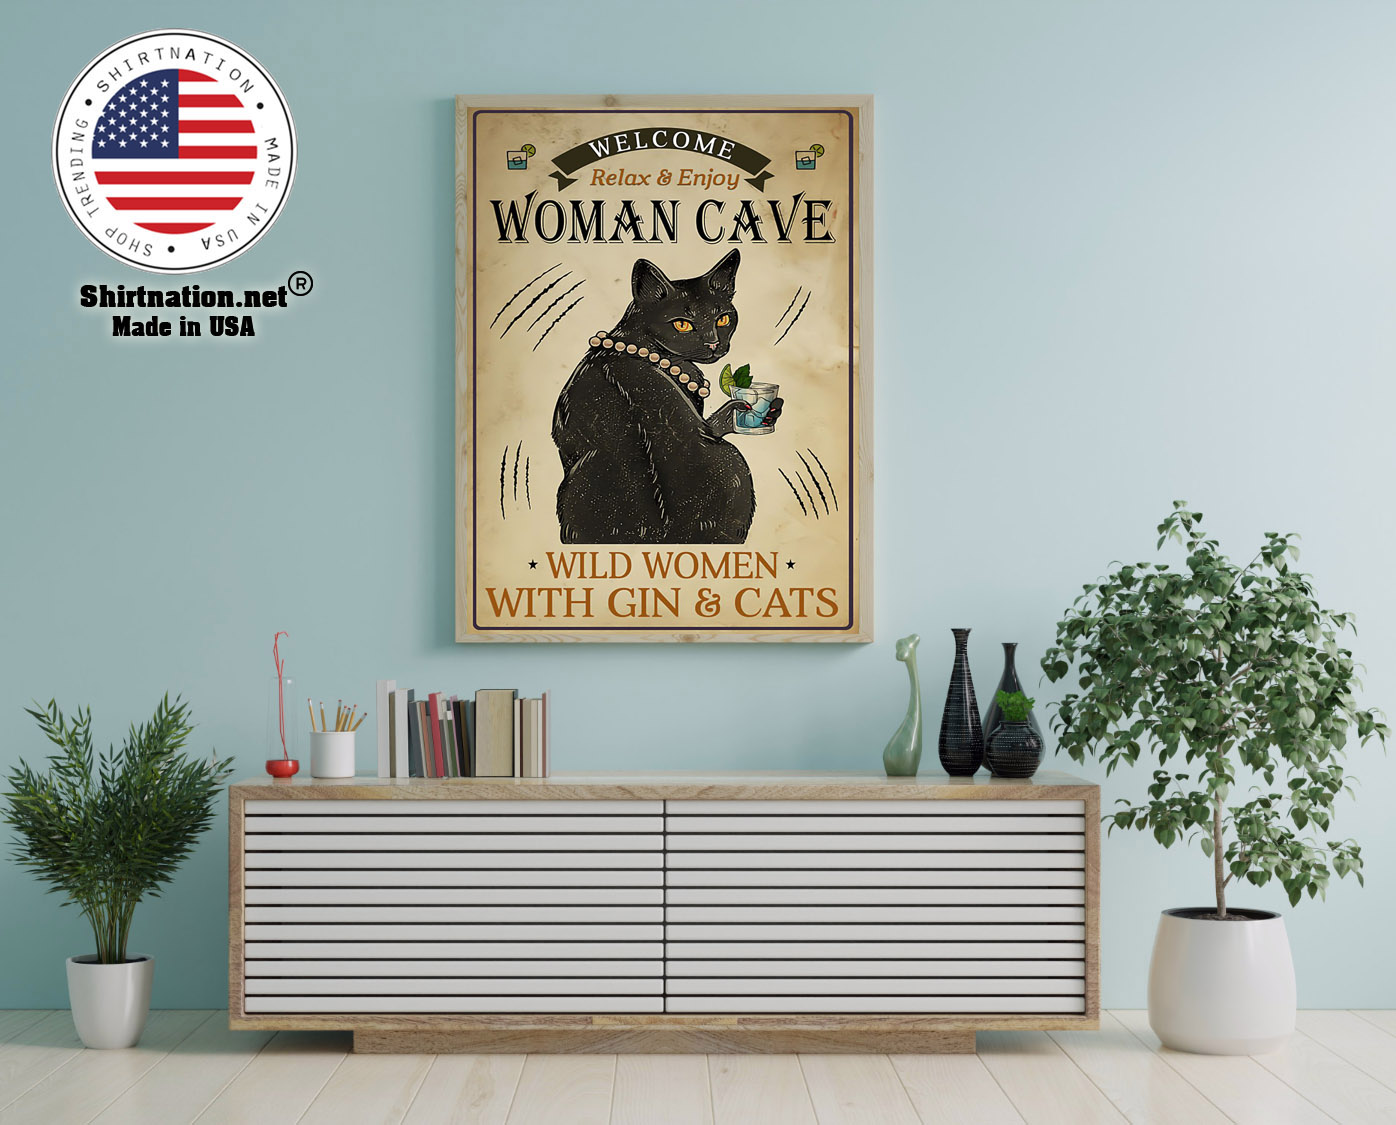 Welcome relax enjoy woman cave will women with gin and cats poster 12